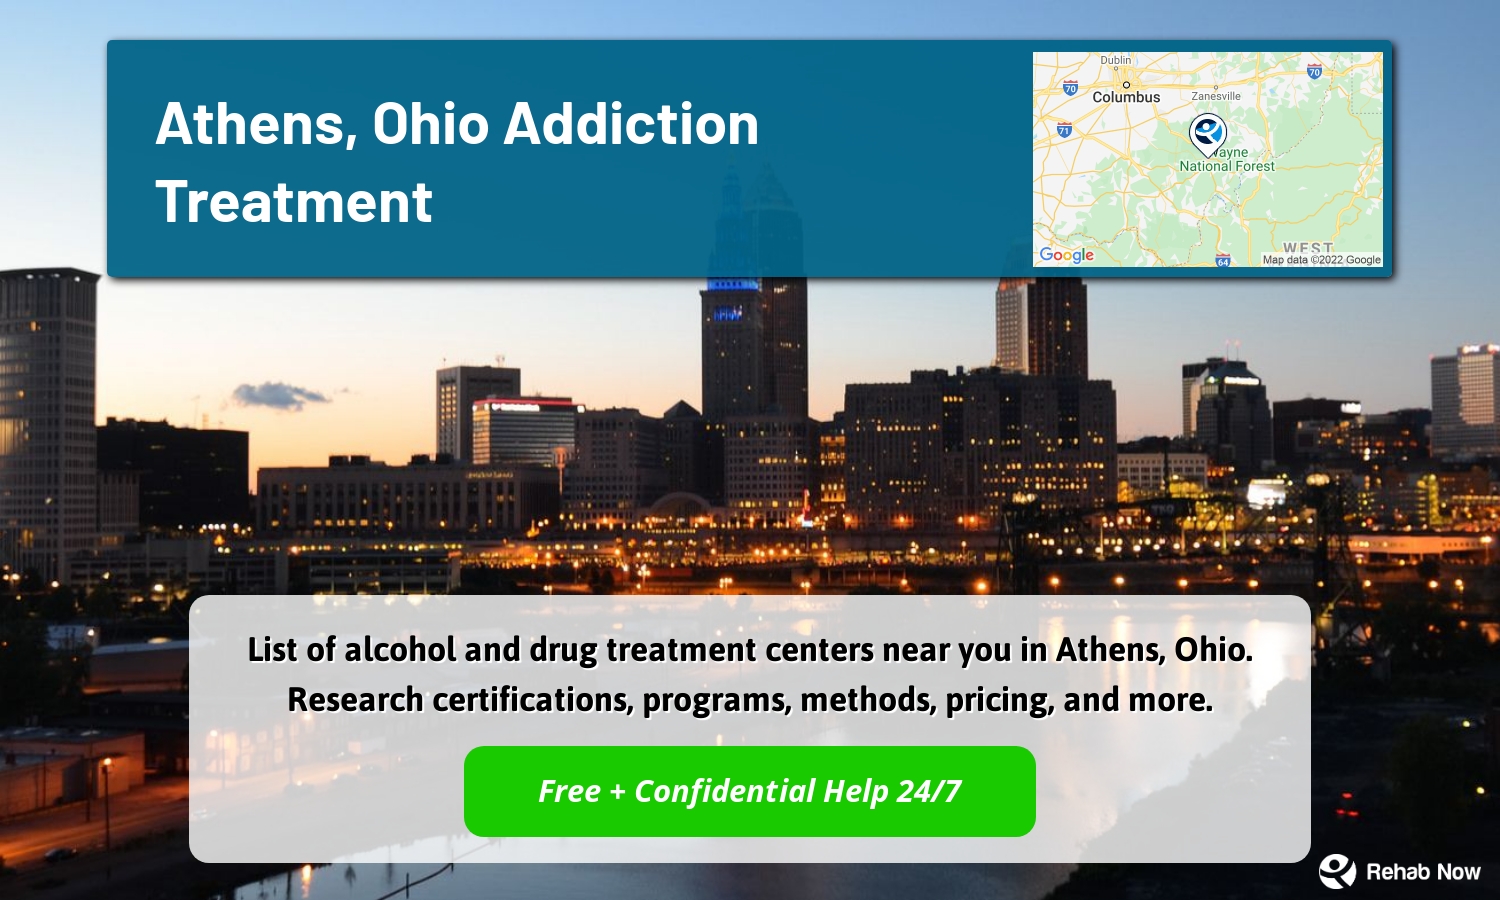 List of alcohol and drug treatment centers near you in Athens, Ohio. Research certifications, programs, methods, pricing, and more.